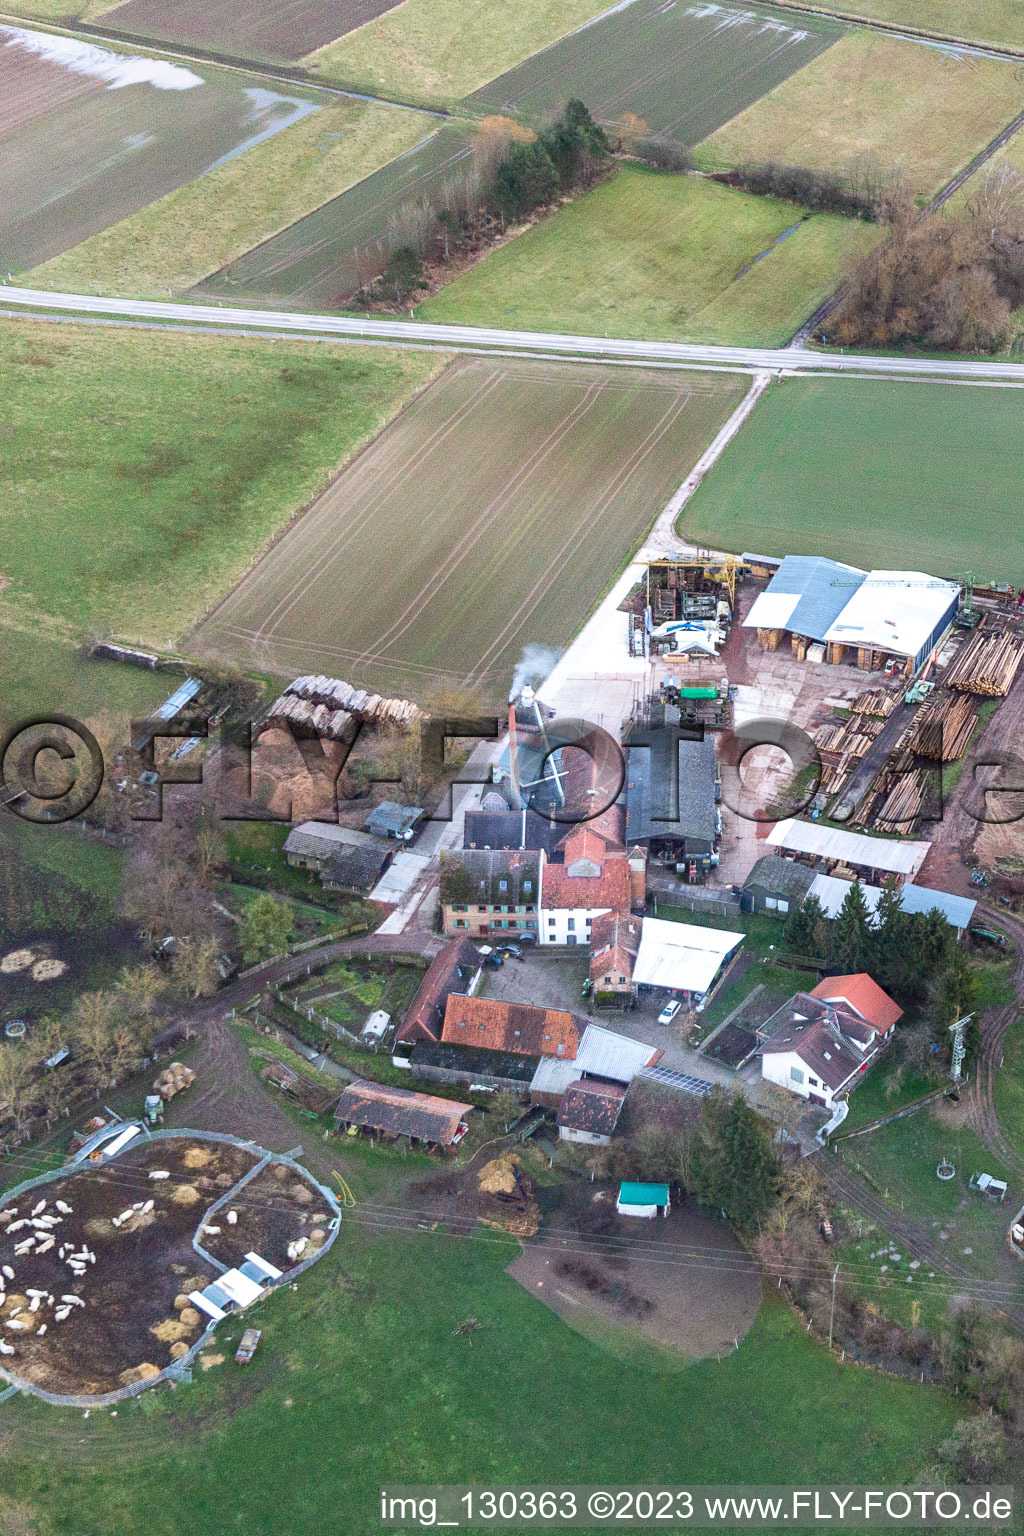 Aerial view of Orth woodworks at the Schaidter Mühle in the district Schaidt in Wörth am Rhein in the state Rhineland-Palatinate, Germany